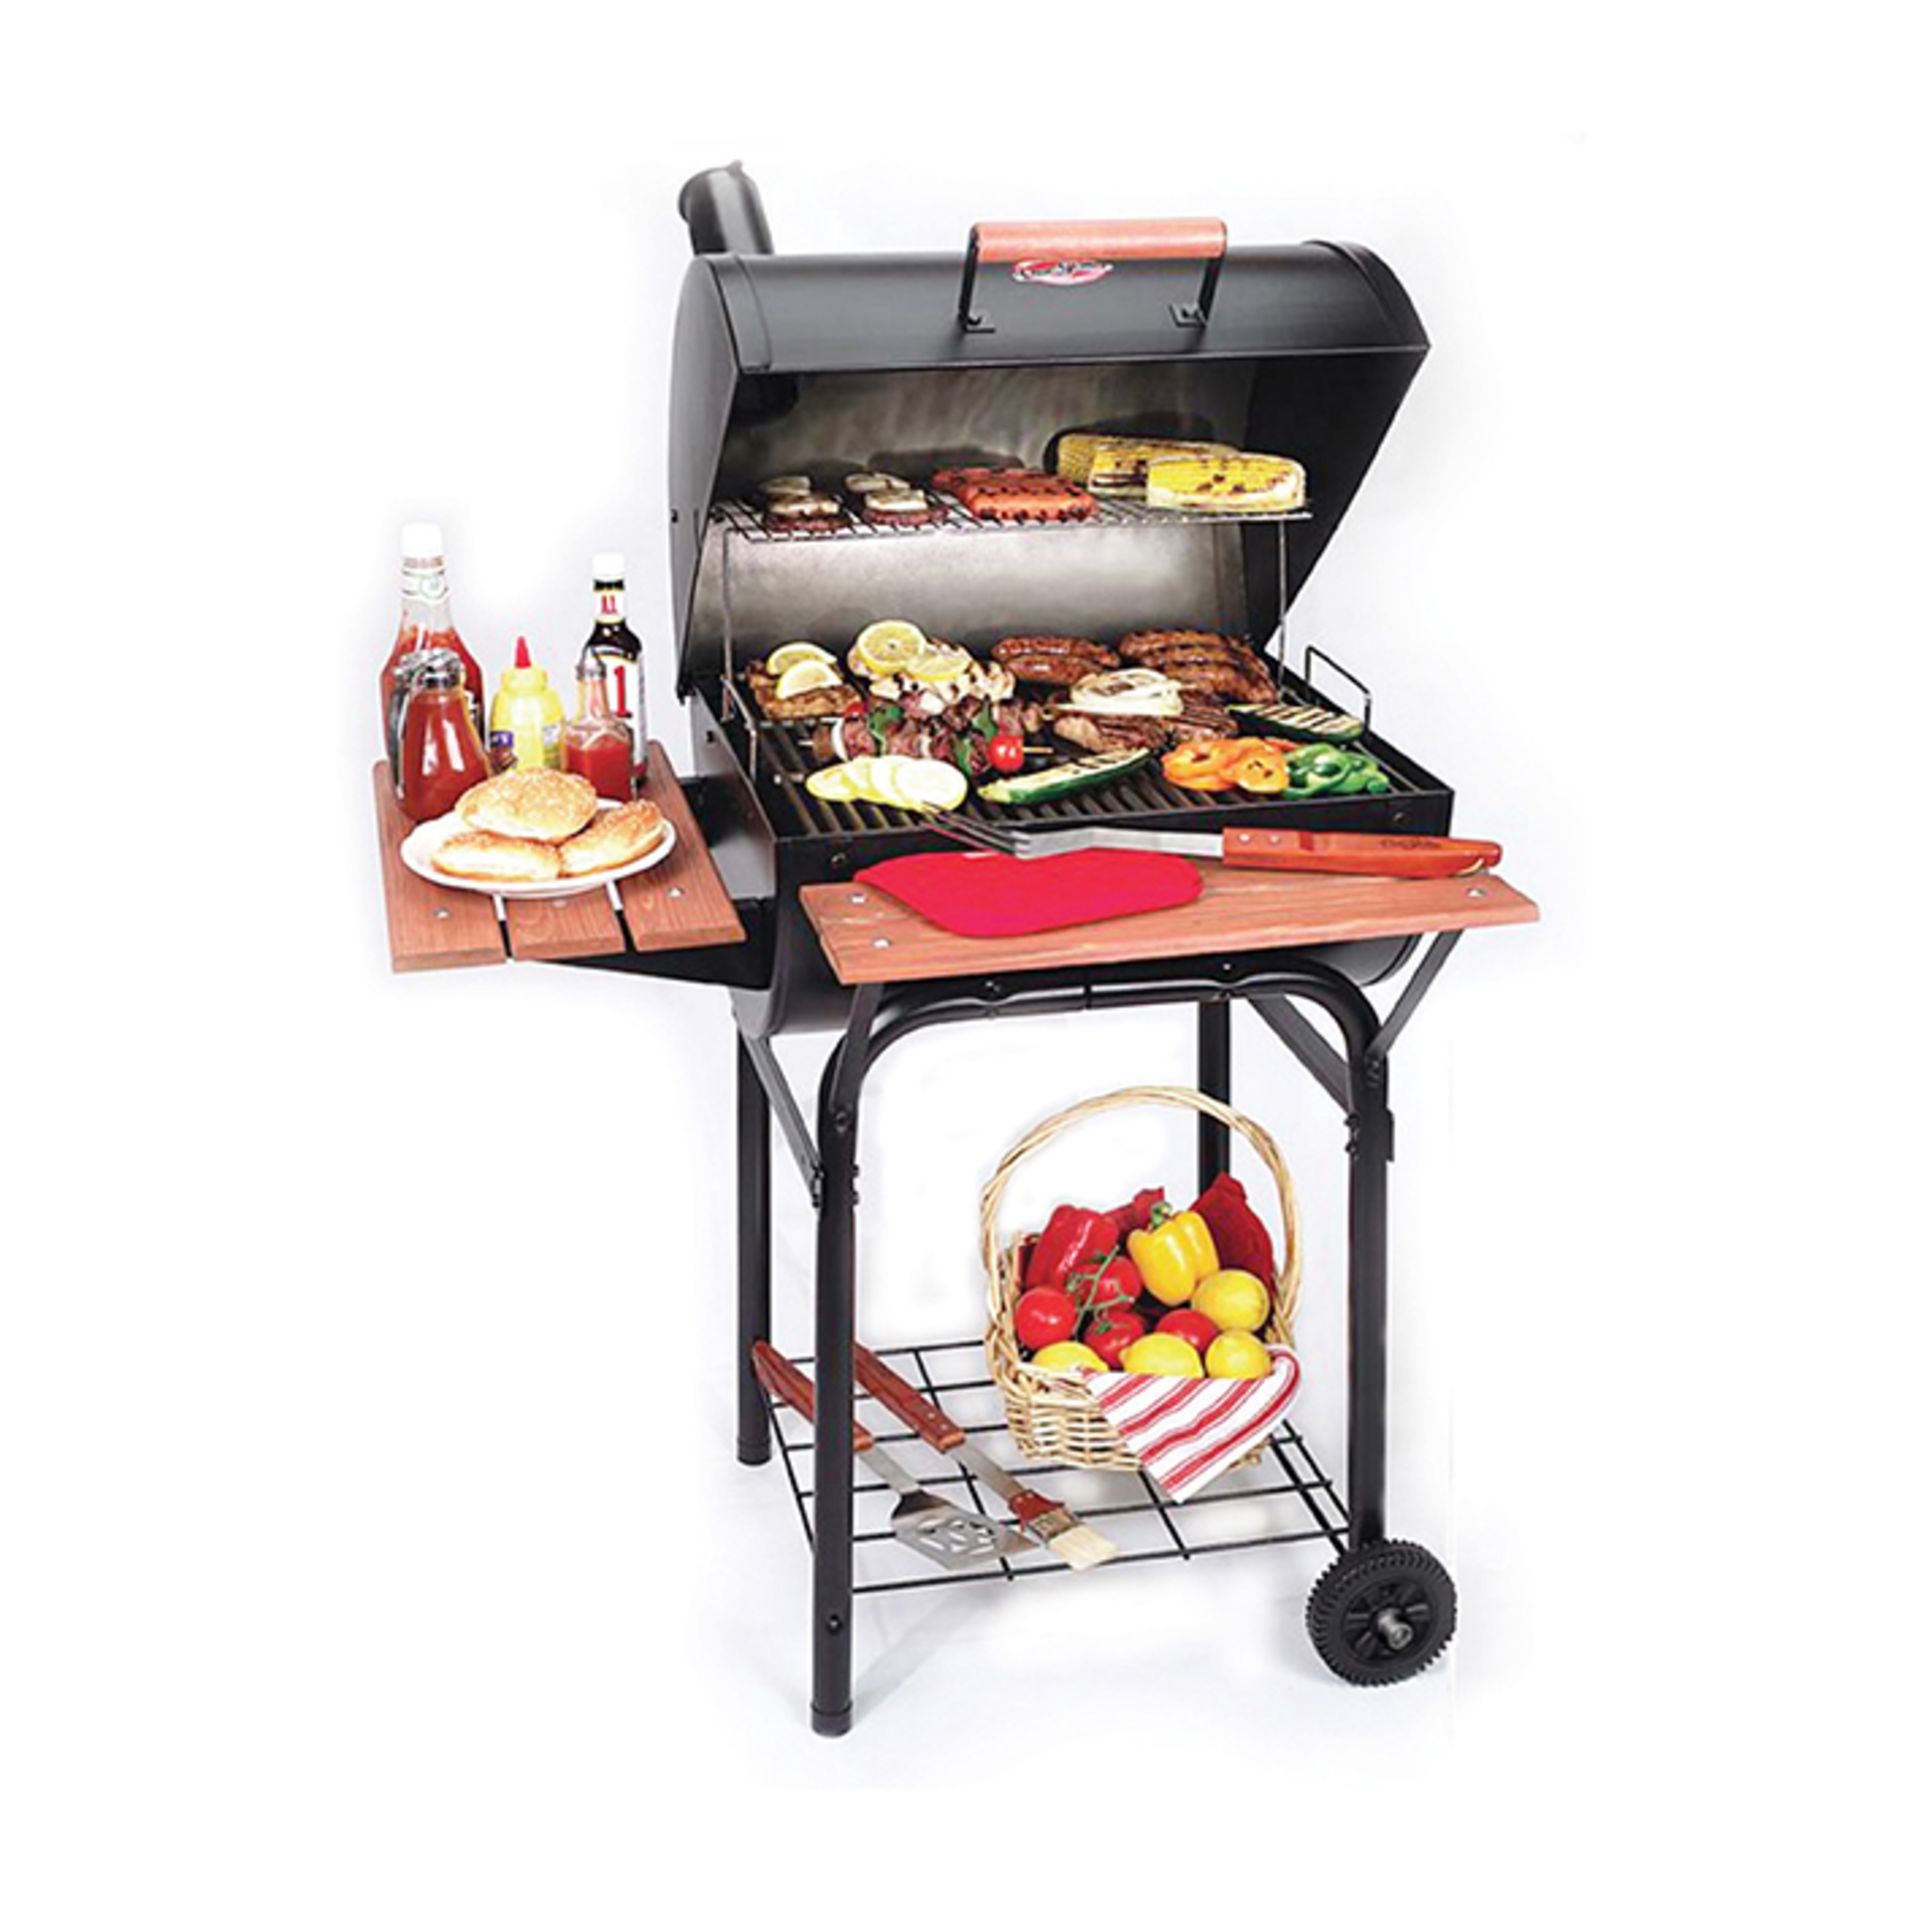 CHARCOAL GRILL PRO BLACK PATIO OUTDOOR GARDEN XL COOKING DELUXE AIR NEW CHAR BBQ